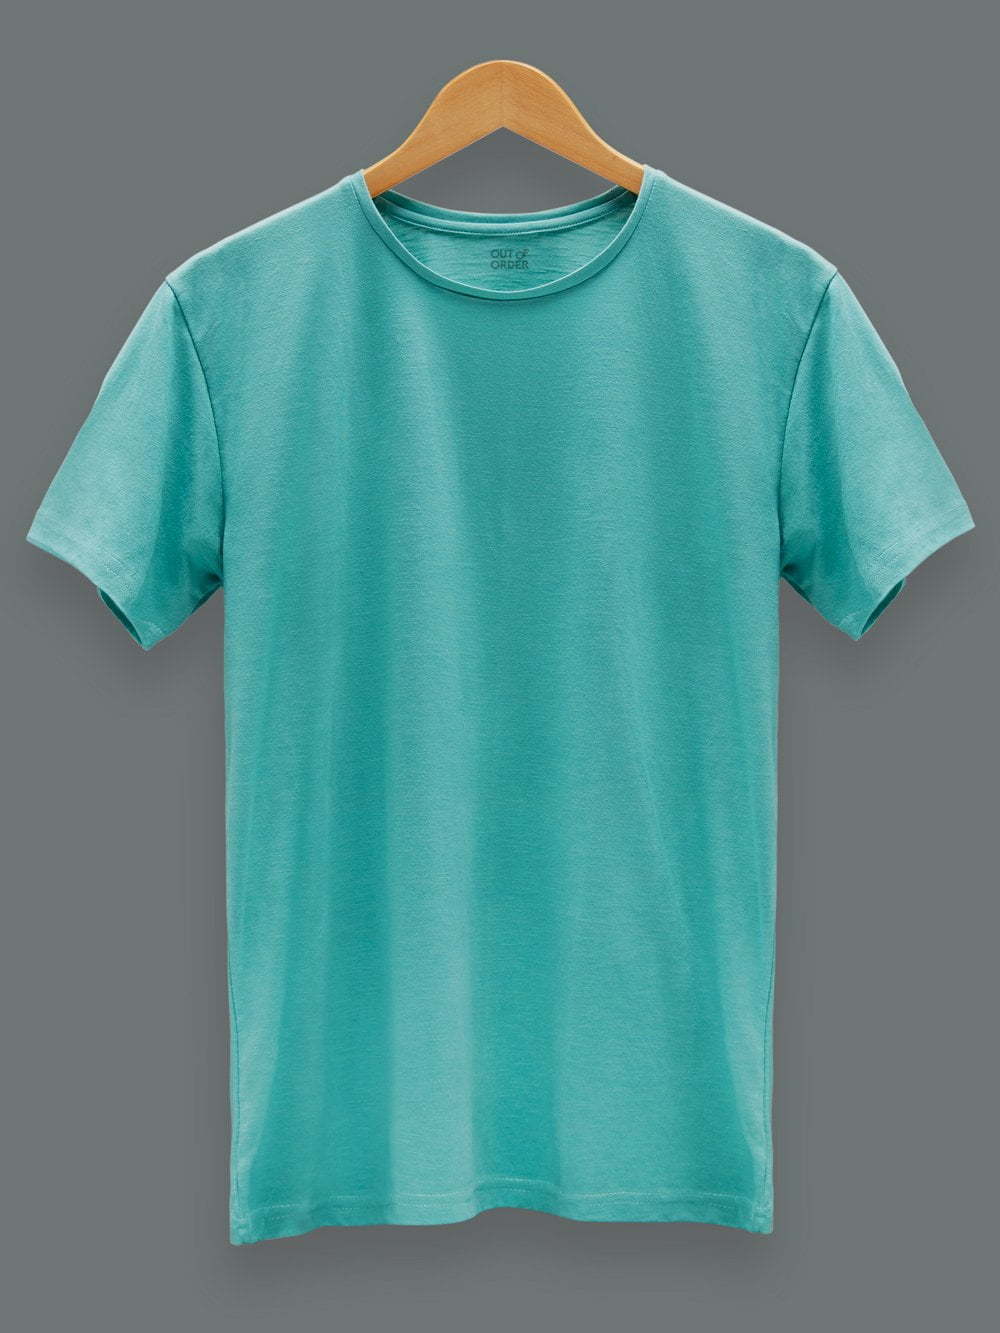 1 Buy Premium Men's Green T-shirt from brand OUT OF ORDER